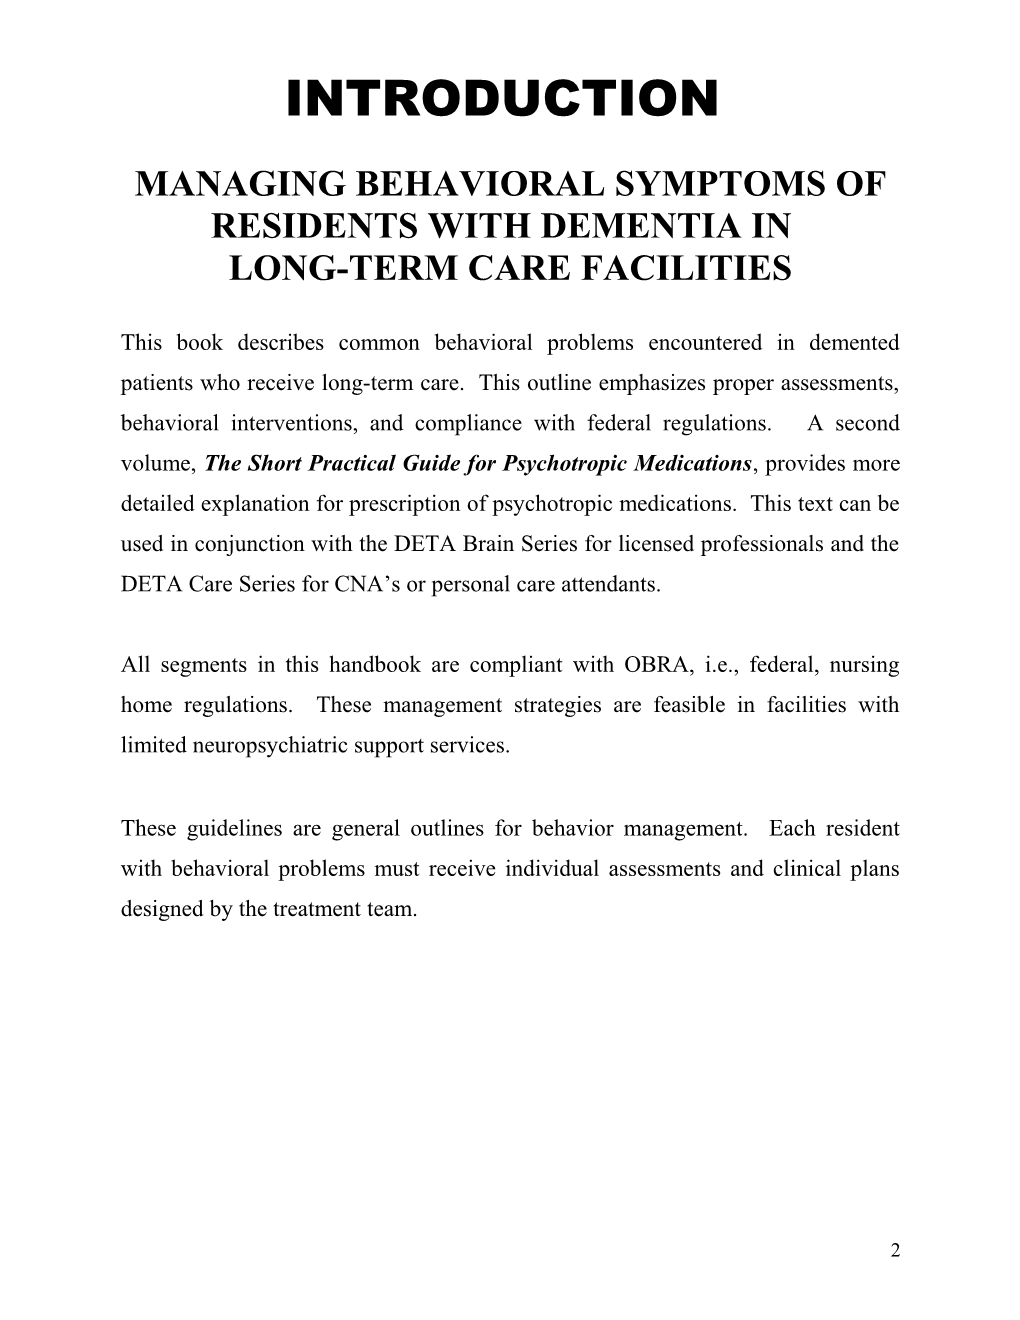 Assessment of the Patient with Behavioral Disturbances